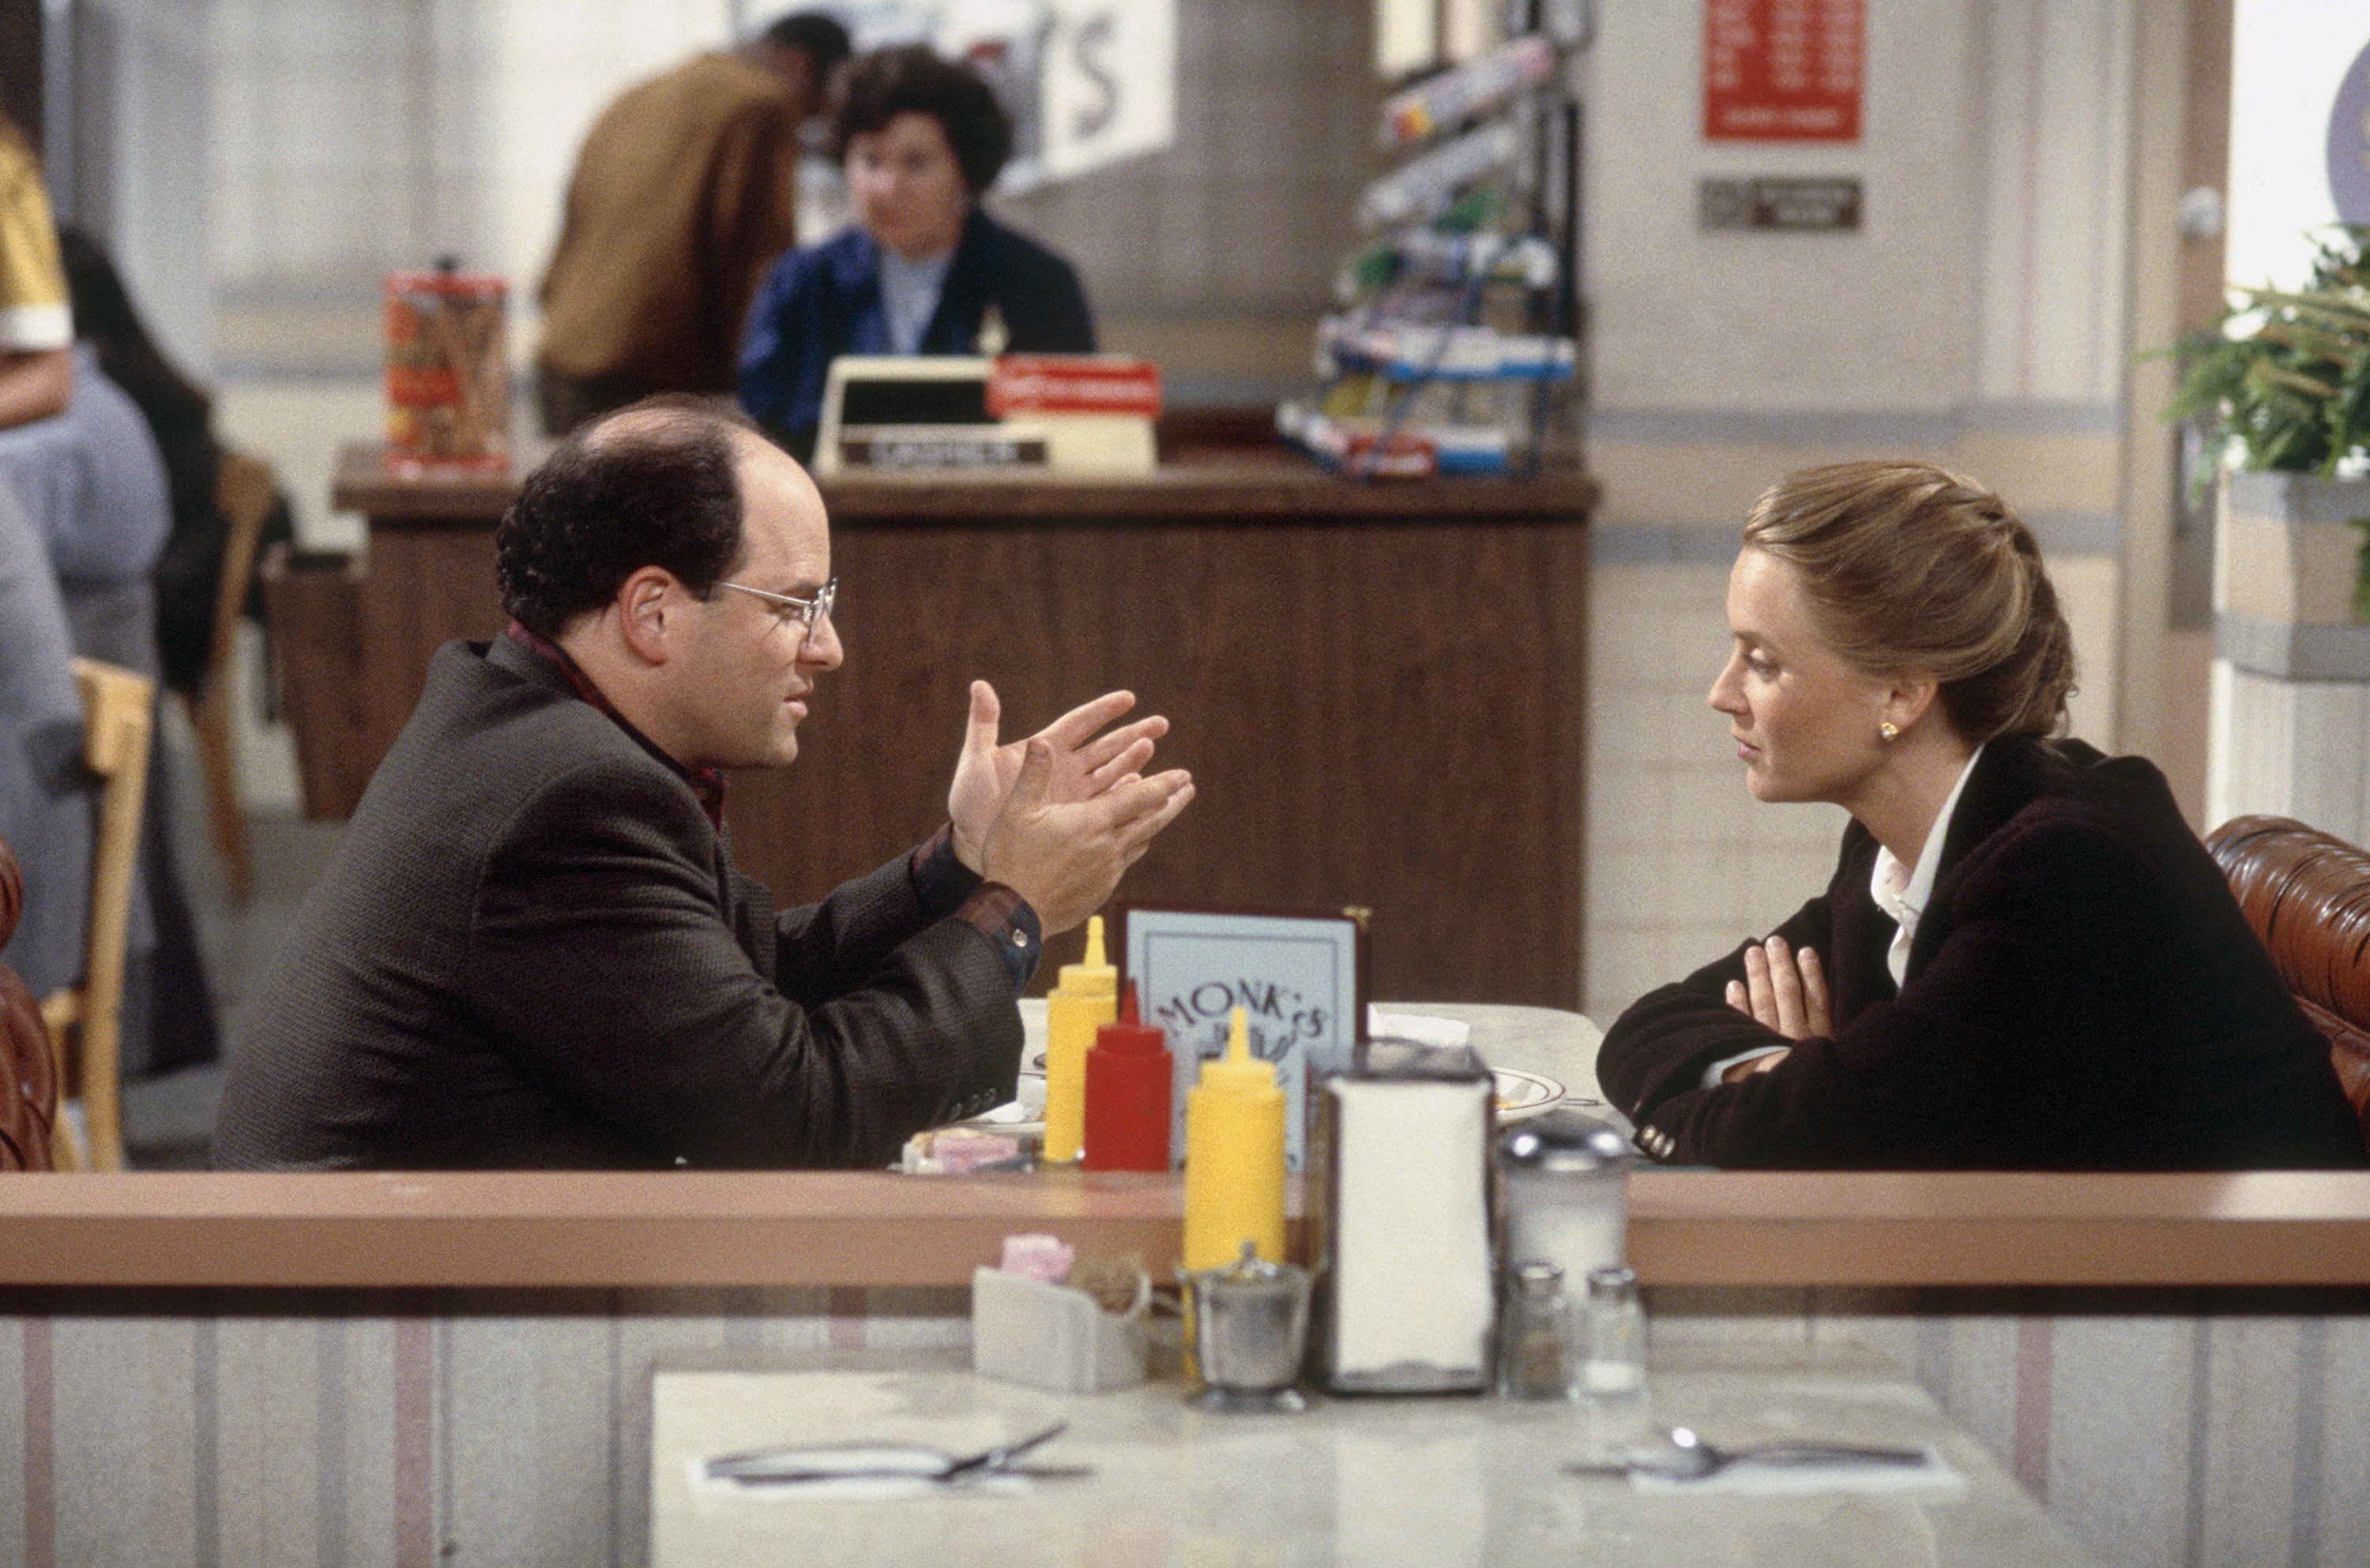 "George" and "Susan" in a scene from 'Seinfeld'